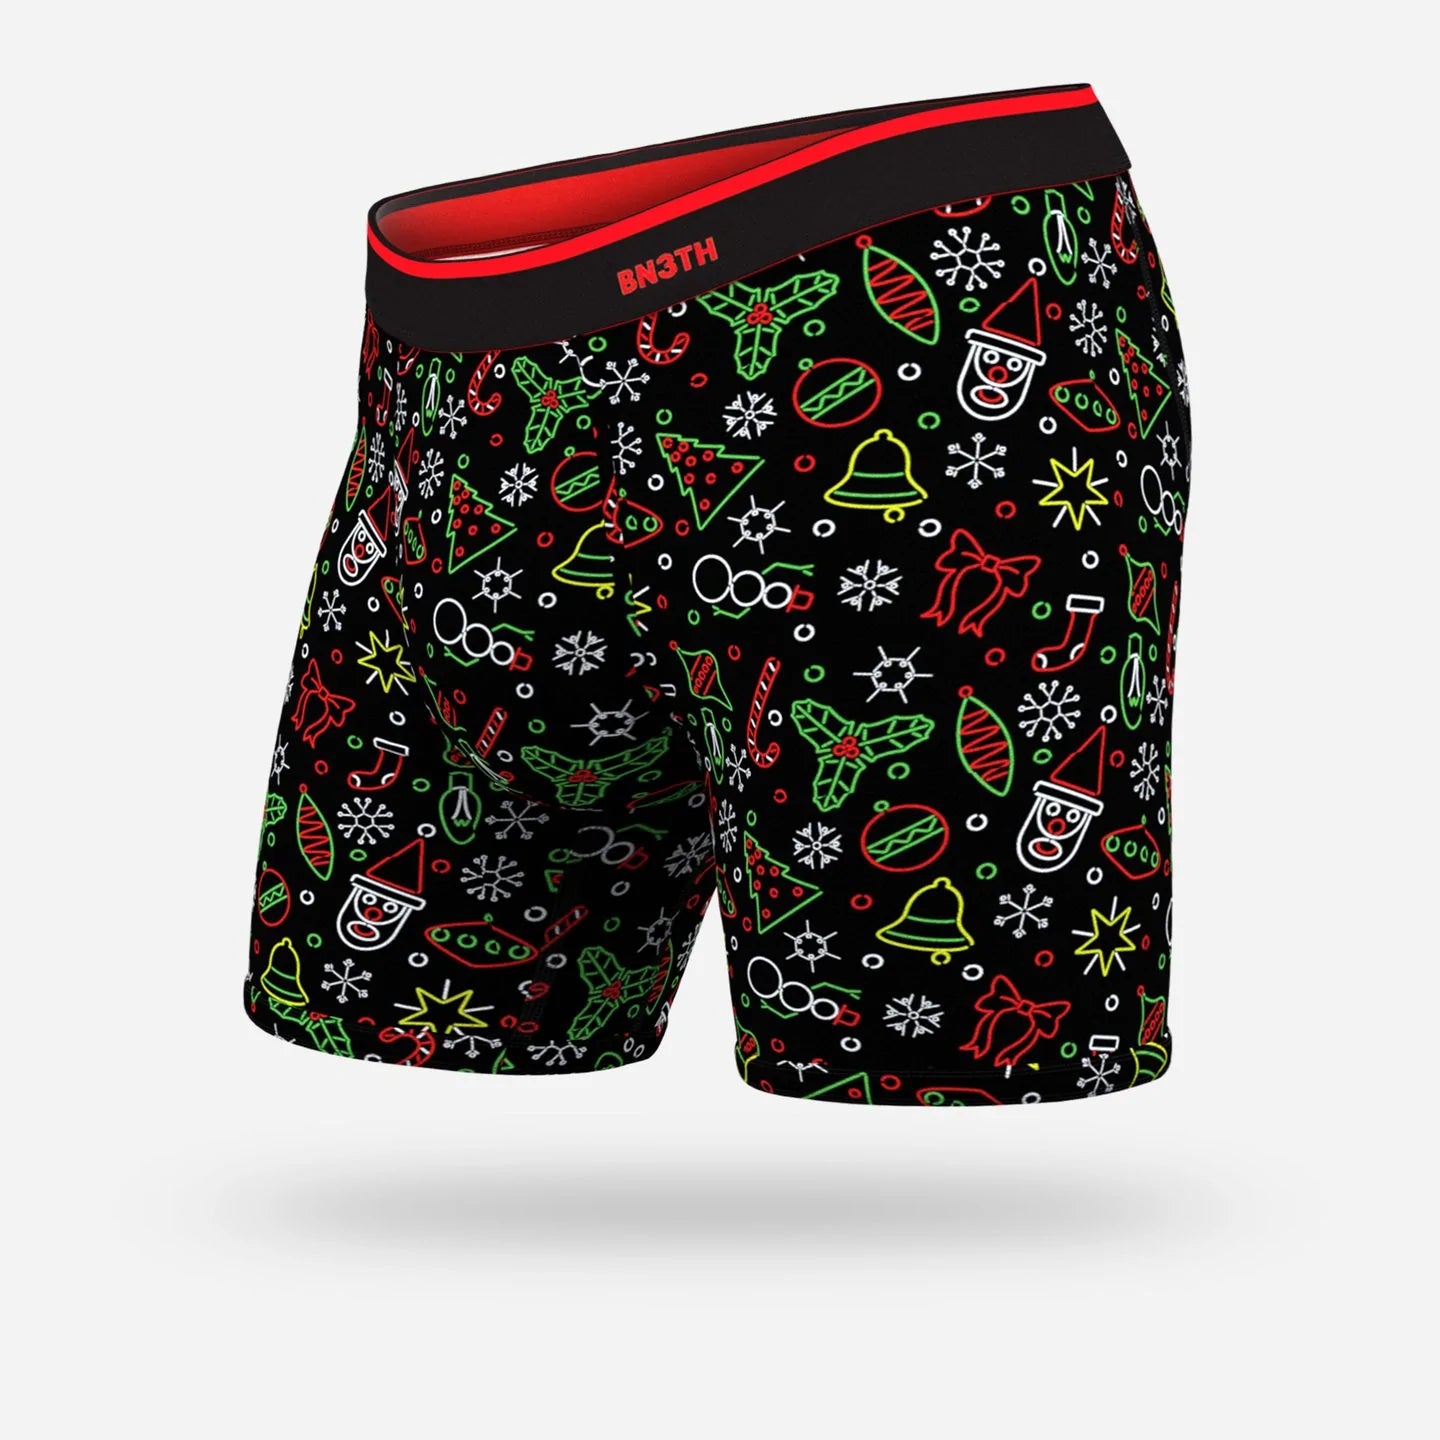 BN3TH BOXER BRIEF IN NEON CHRISTMAS